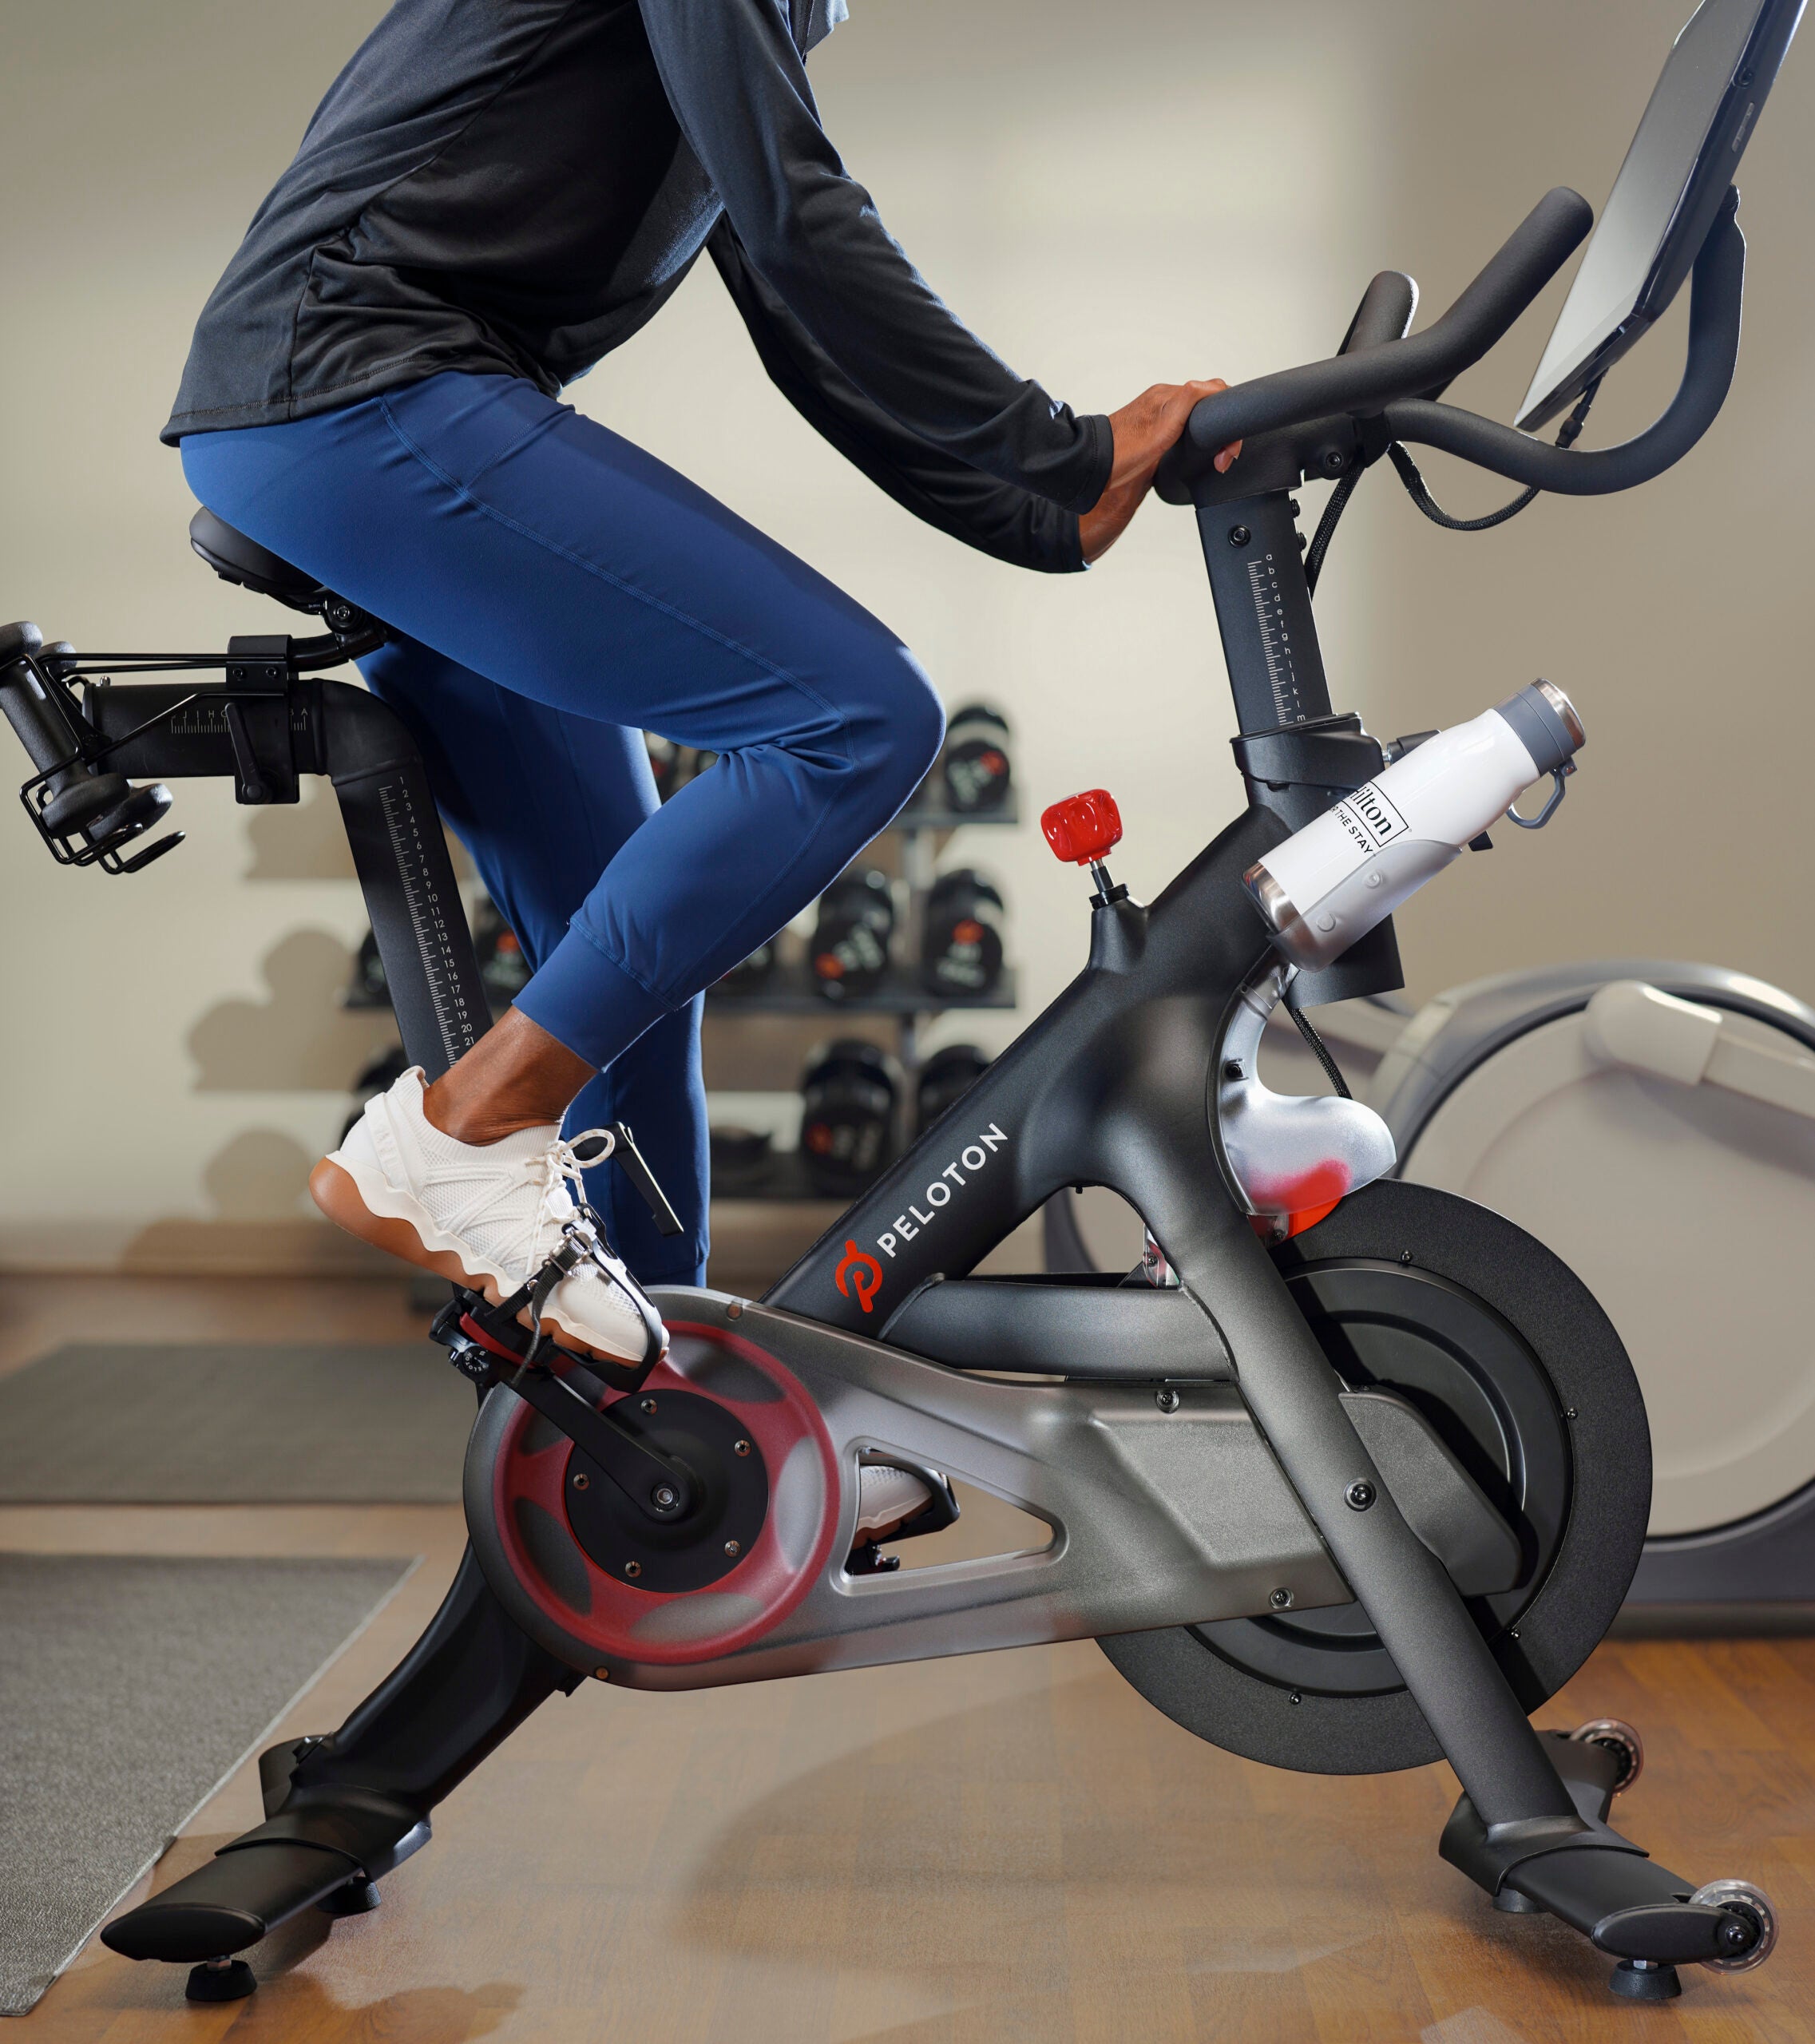 Nearly every Hilton hotel in the US will get a Peloton bike by year’s end